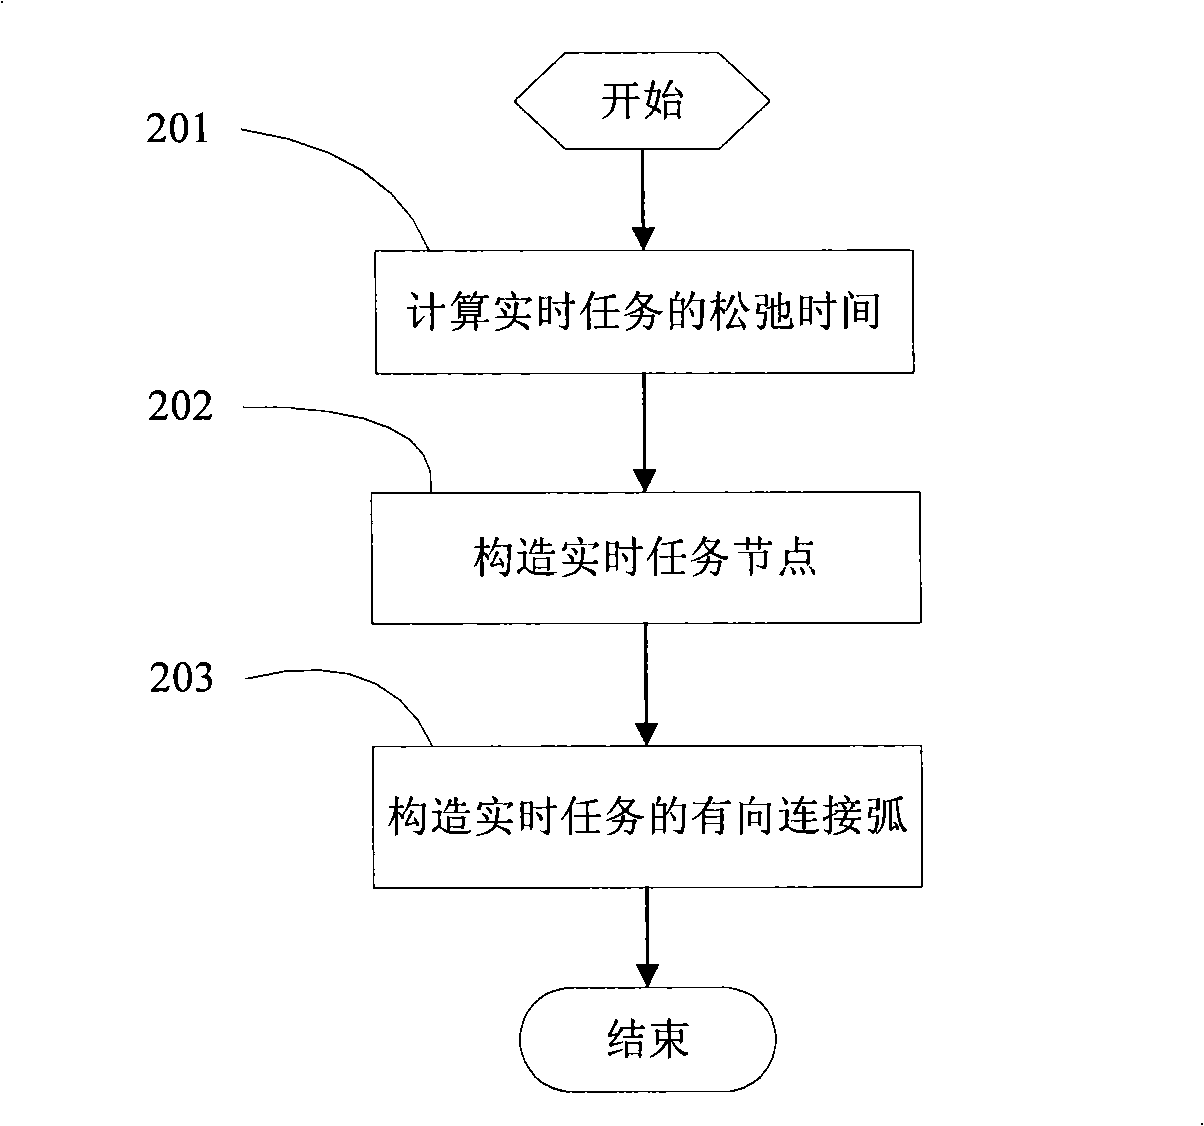 Method of optimization of multiprocessor real-time task execution power consumption